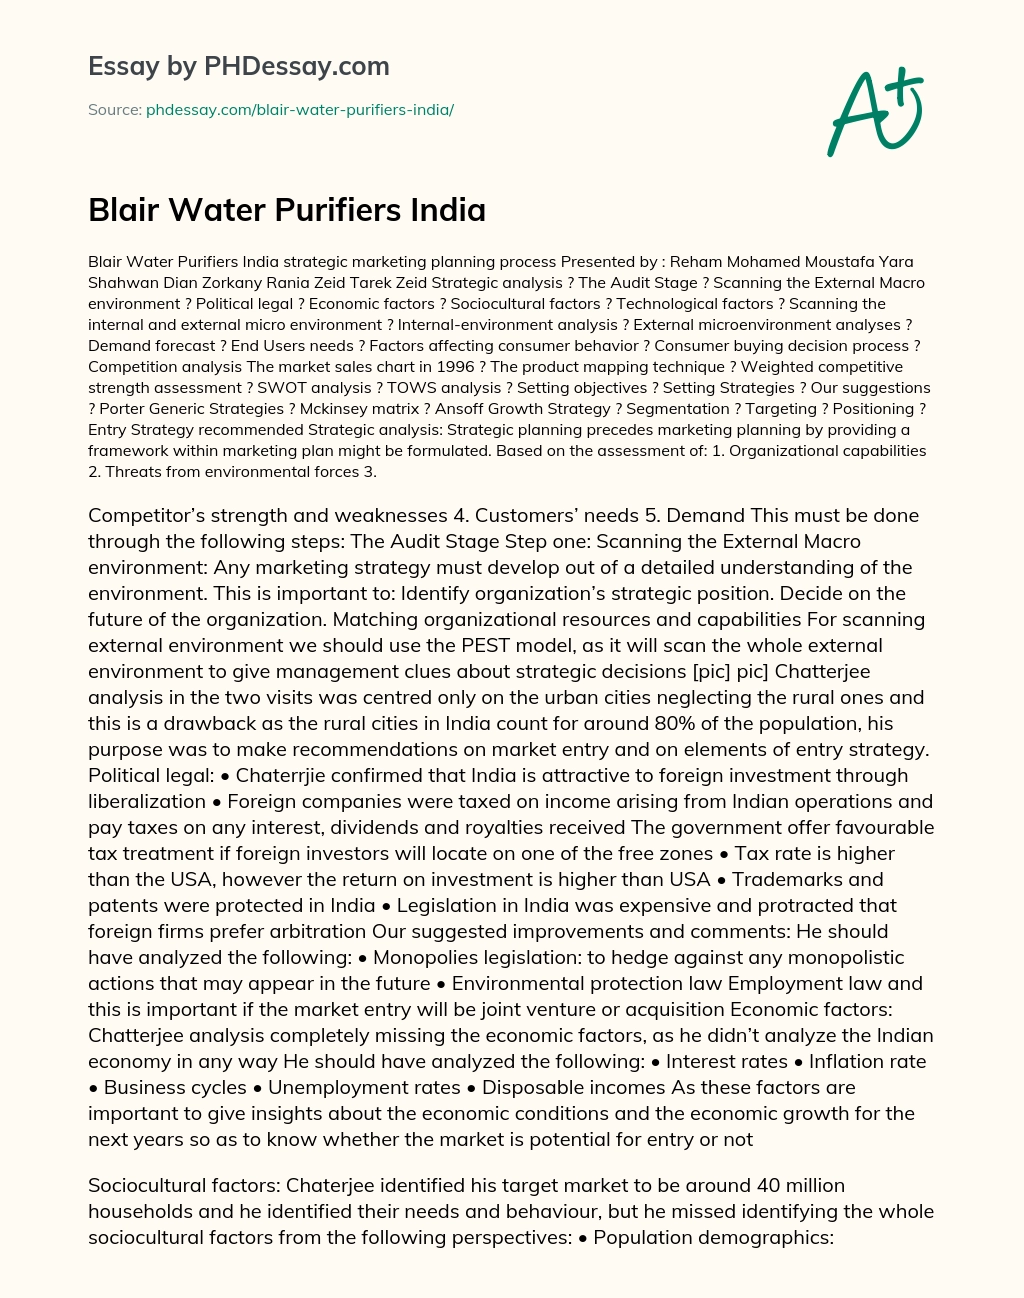 Blair Water Purifiers India essay